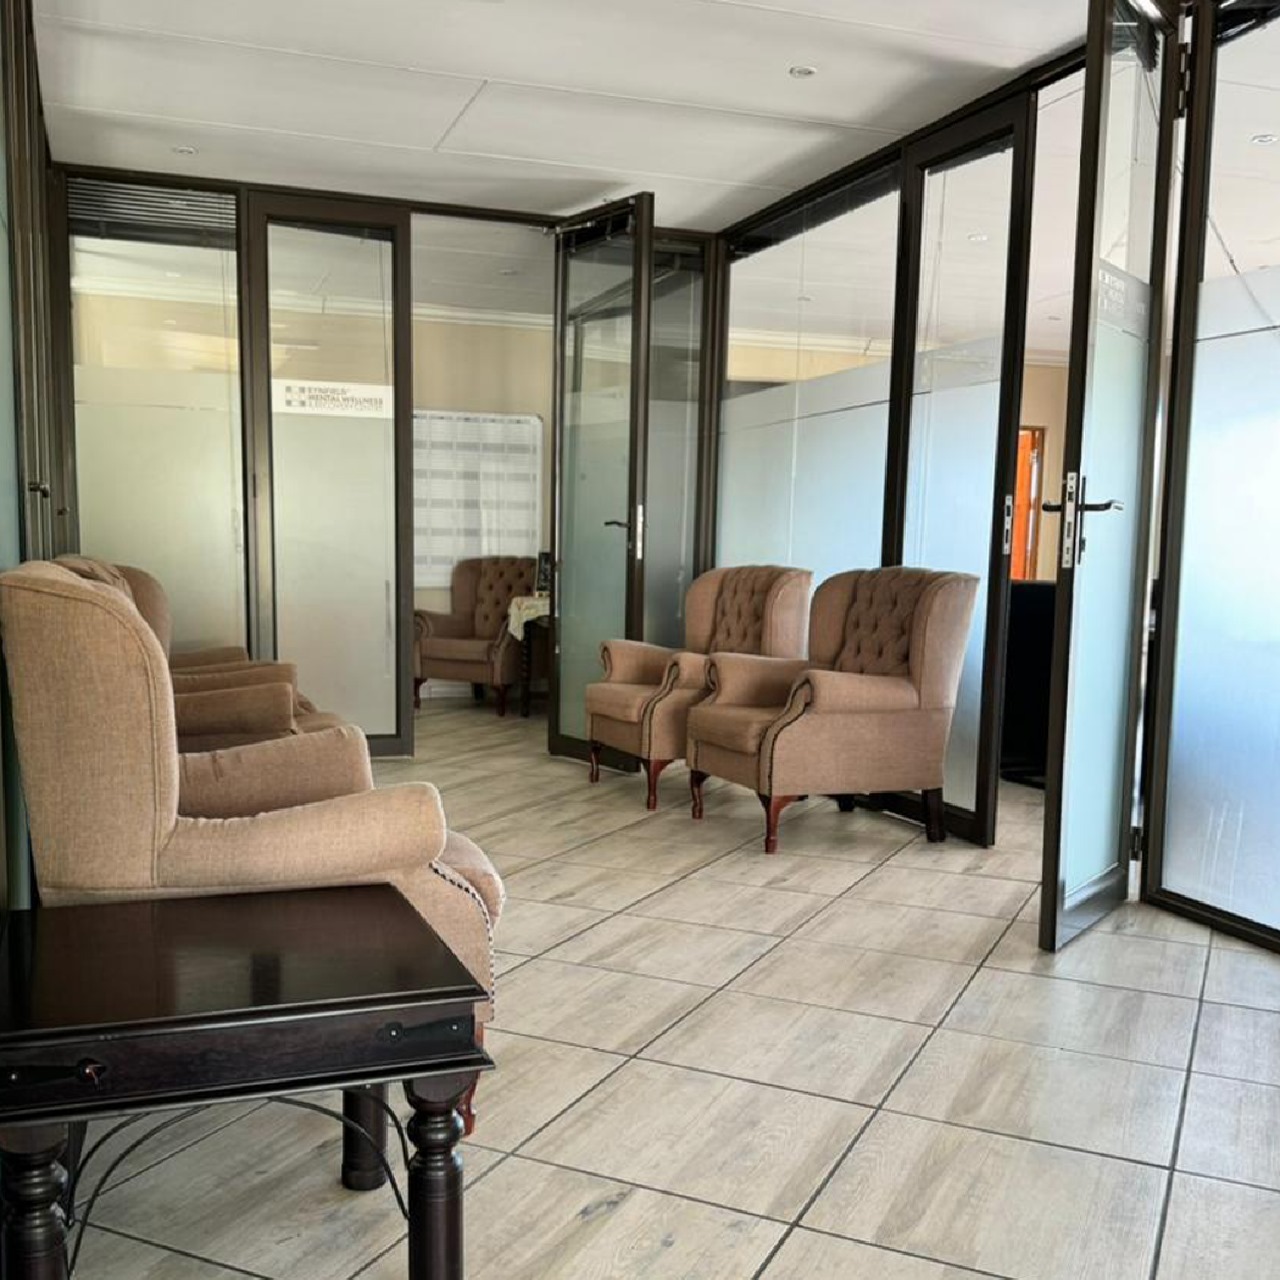 Waiting area upstairs at ARC Addiction Recovery Centre with plush armchairs, glass doors, and tiled flooring, located near the psychologists' rooms.